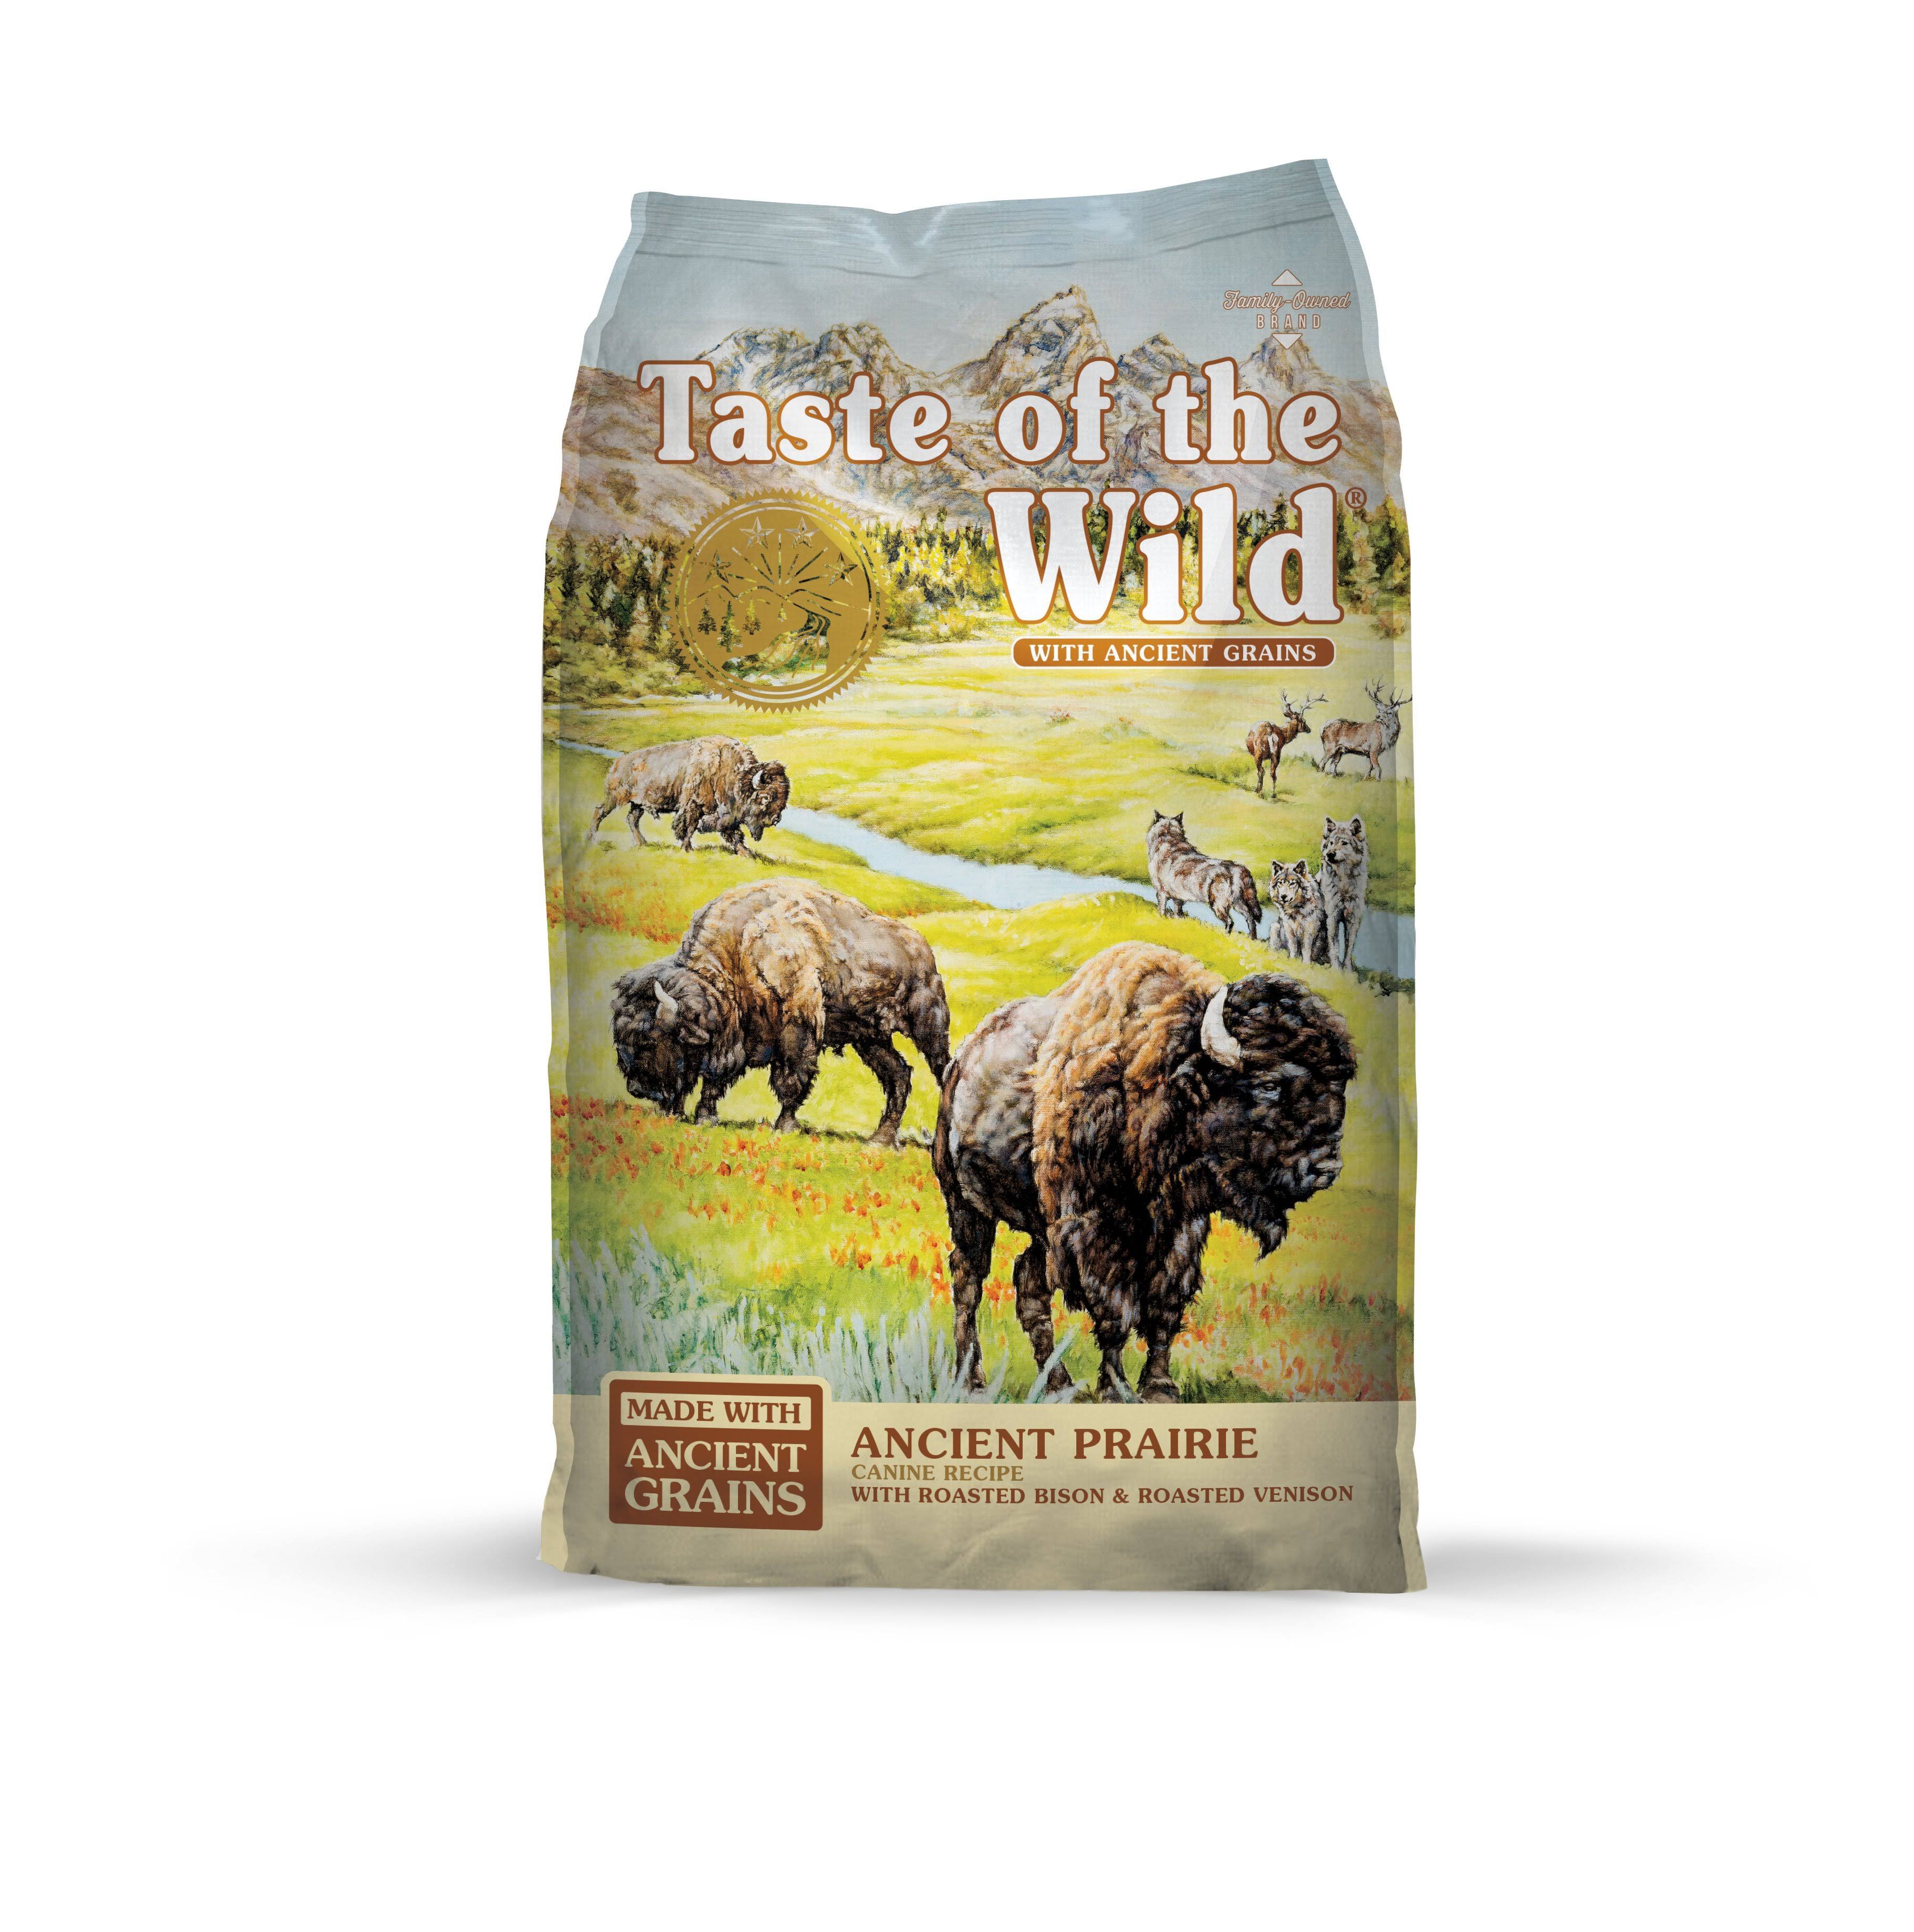 Taste of The Wild Ancient Prairie with Ancient Grains Dry Dog Food - 28 lbs.